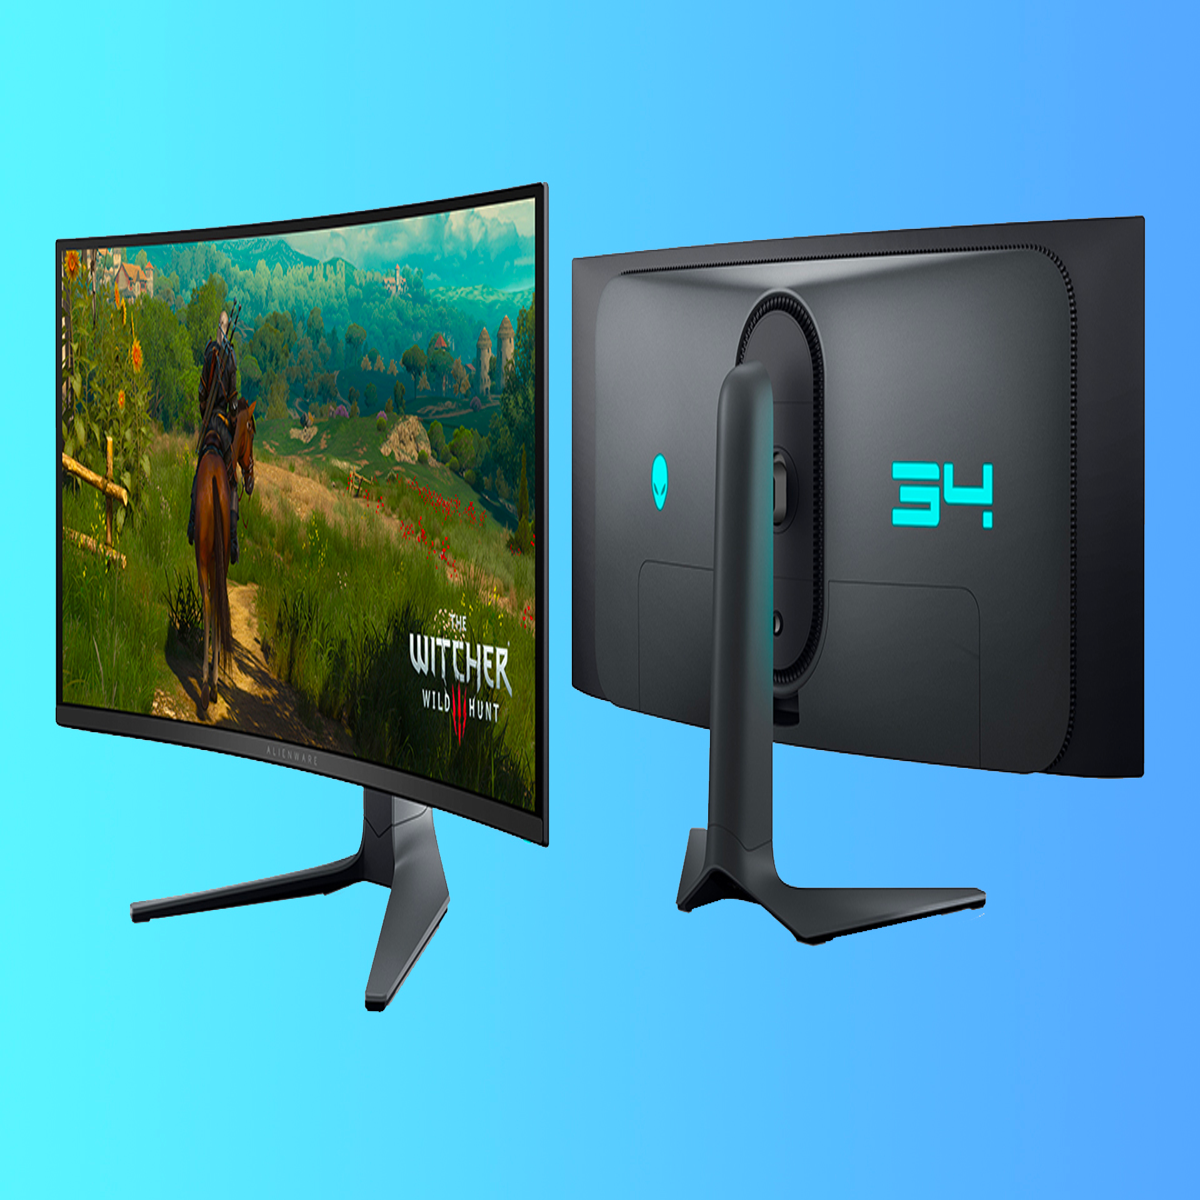 Yes, You Can Use PS5 with an Ultrawide Monitor